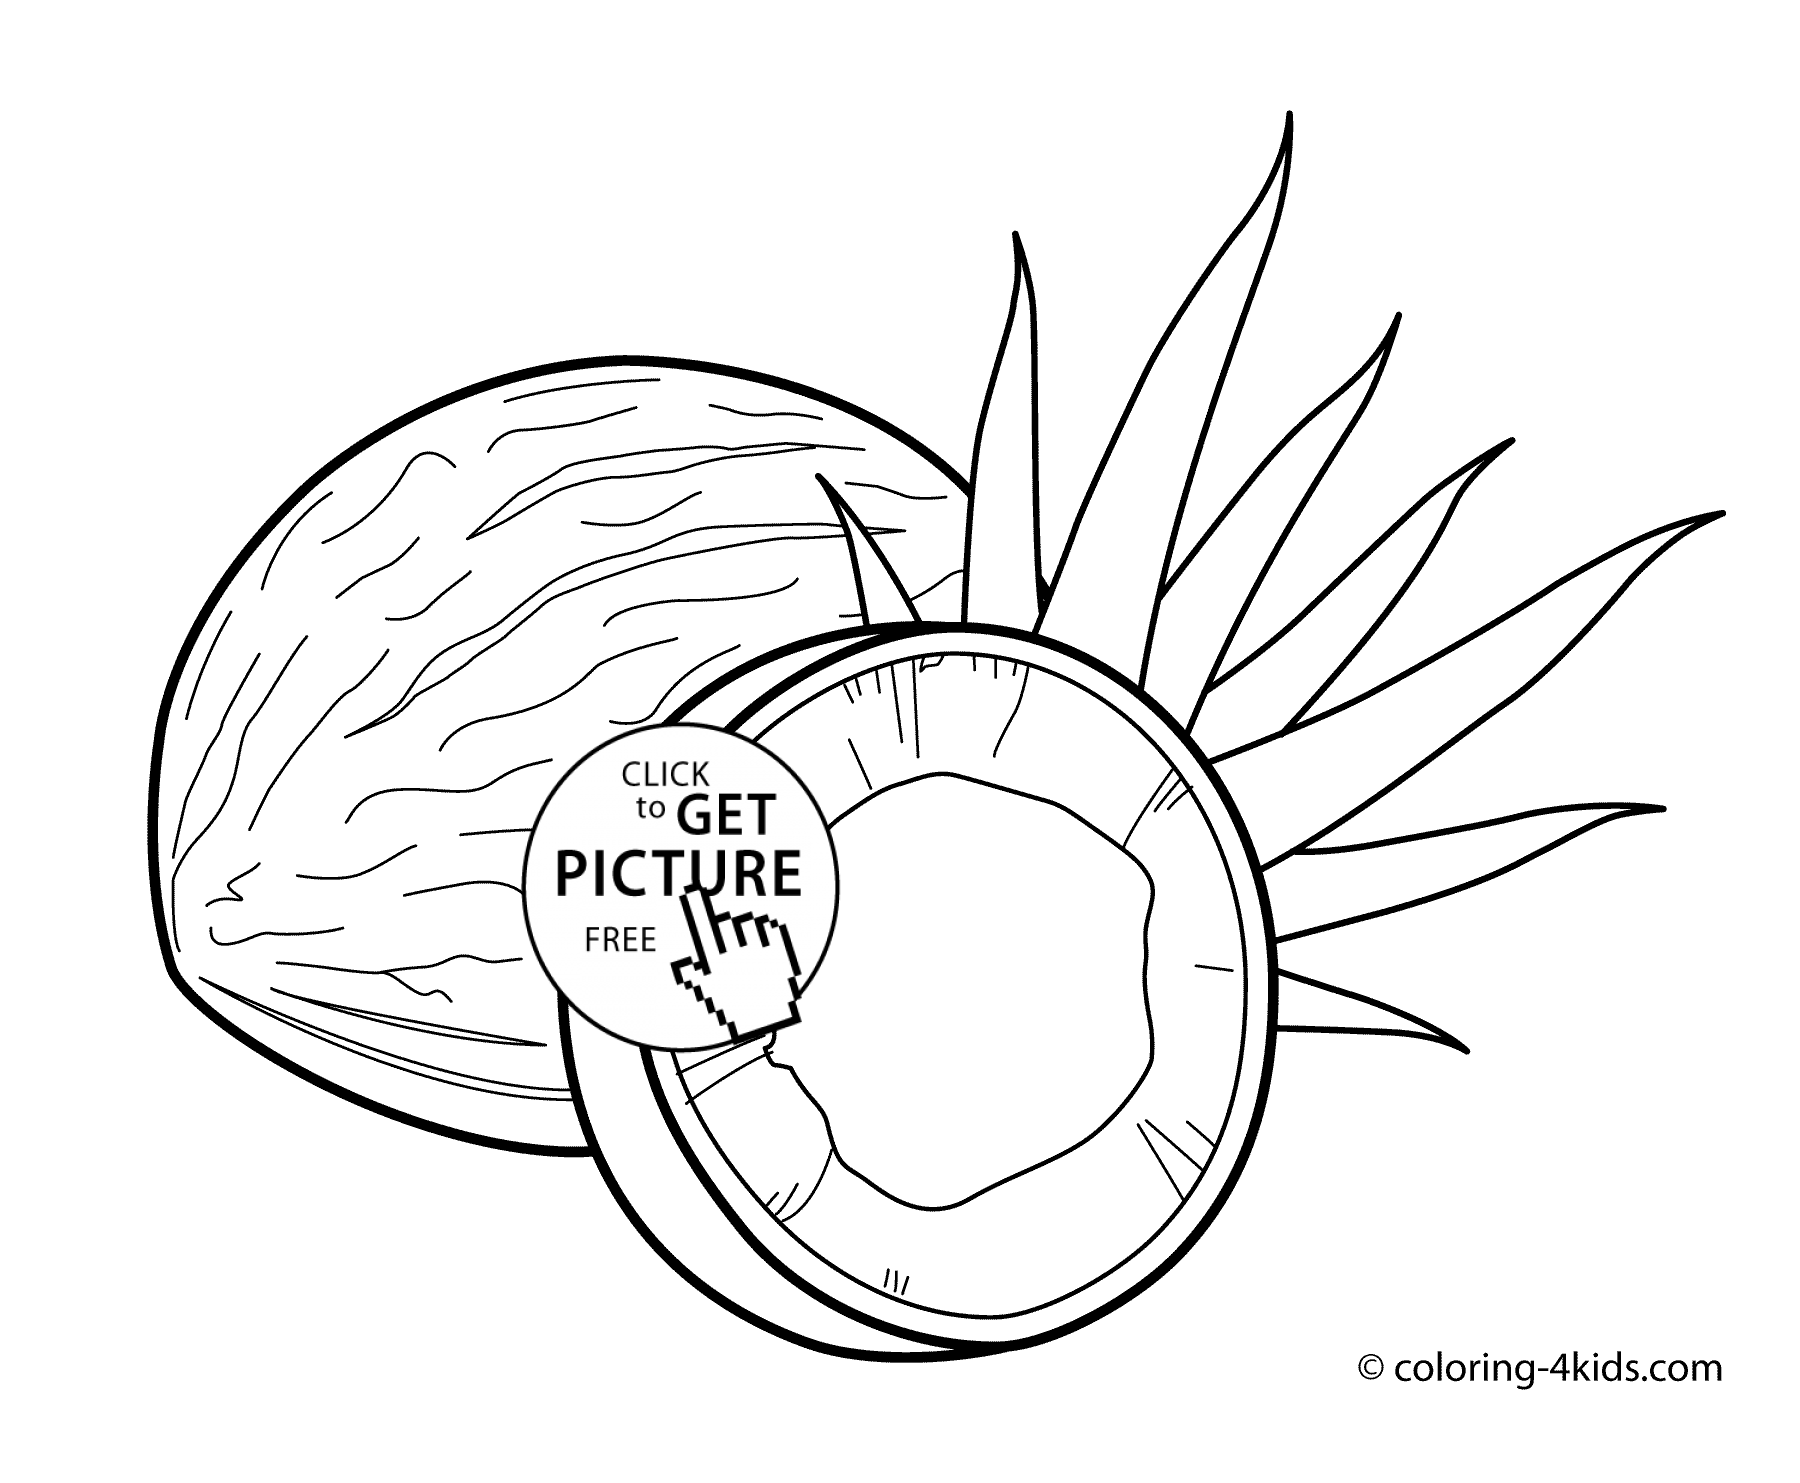 Coconuts fruits| Coloring Pages for Kids, printable free | coloing